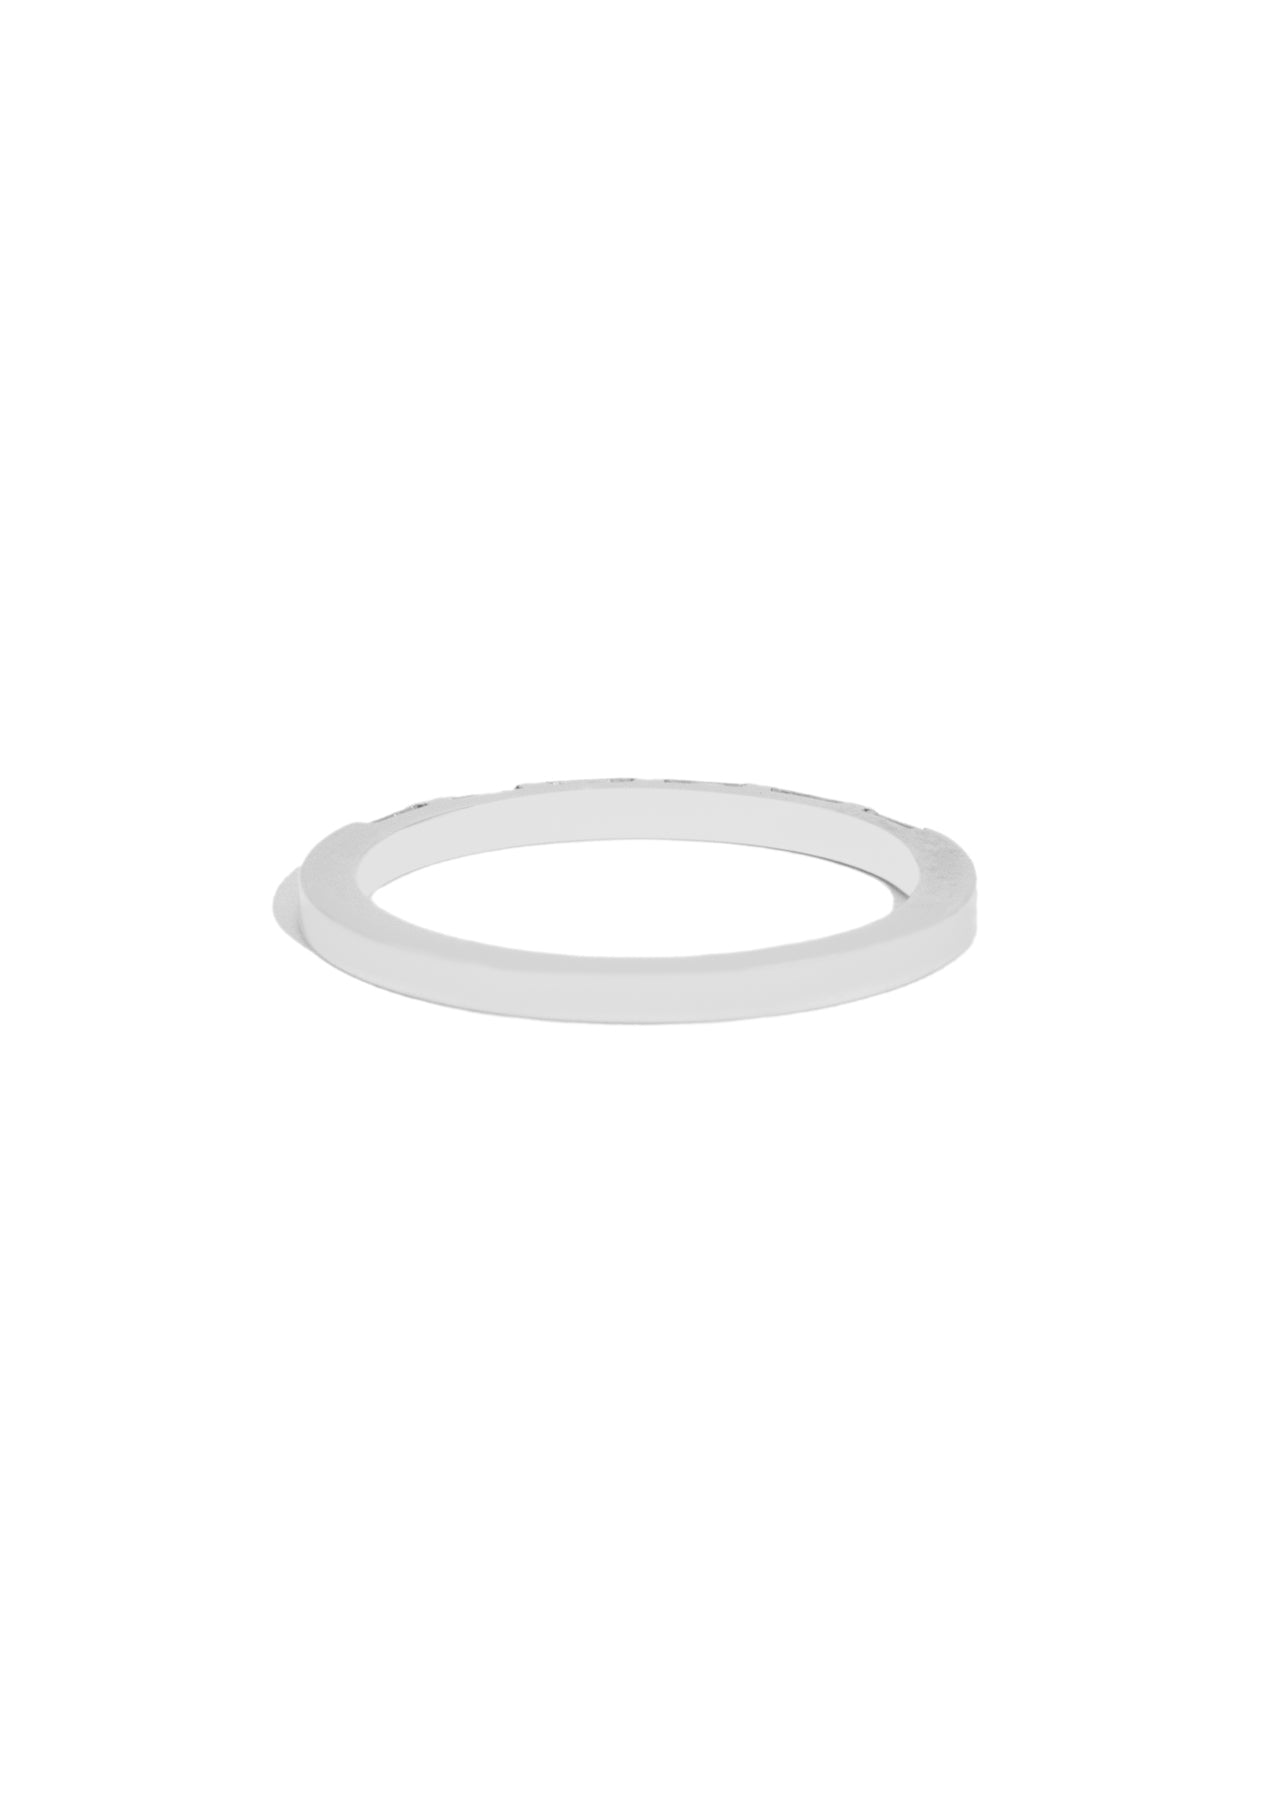 The Baguette Diamond 18ct White Gold Band